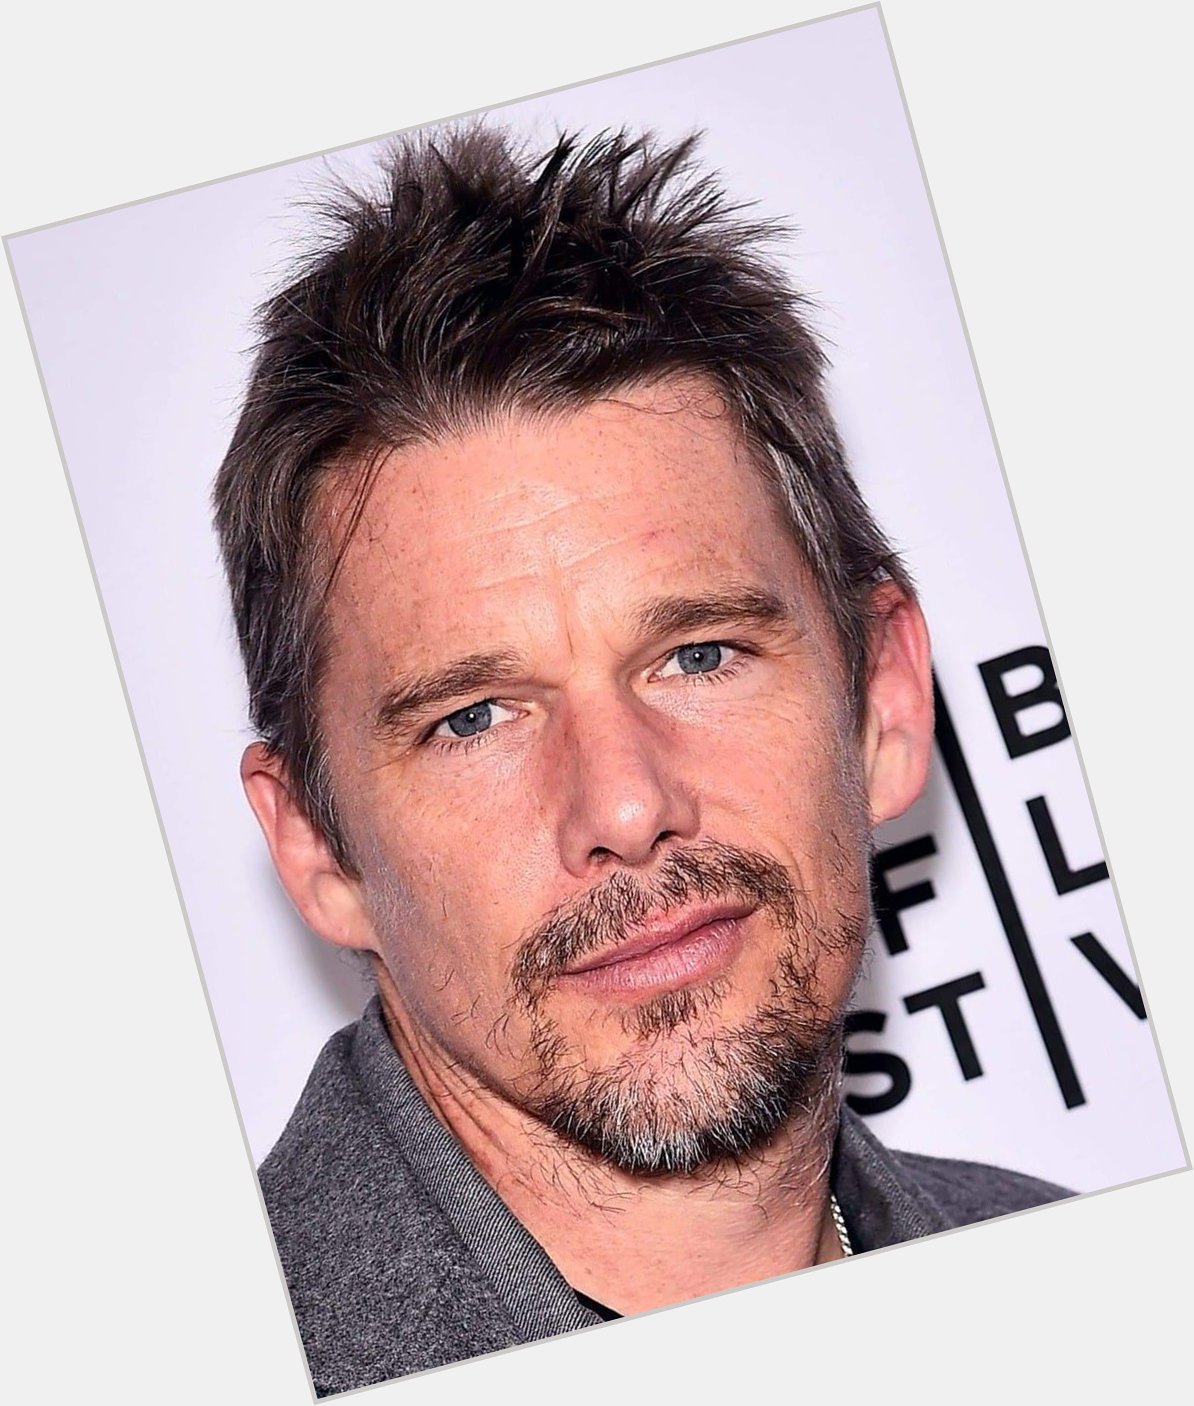 Happy birthday to the amazing actor, Ethan Hawke,he turns 48 years today               